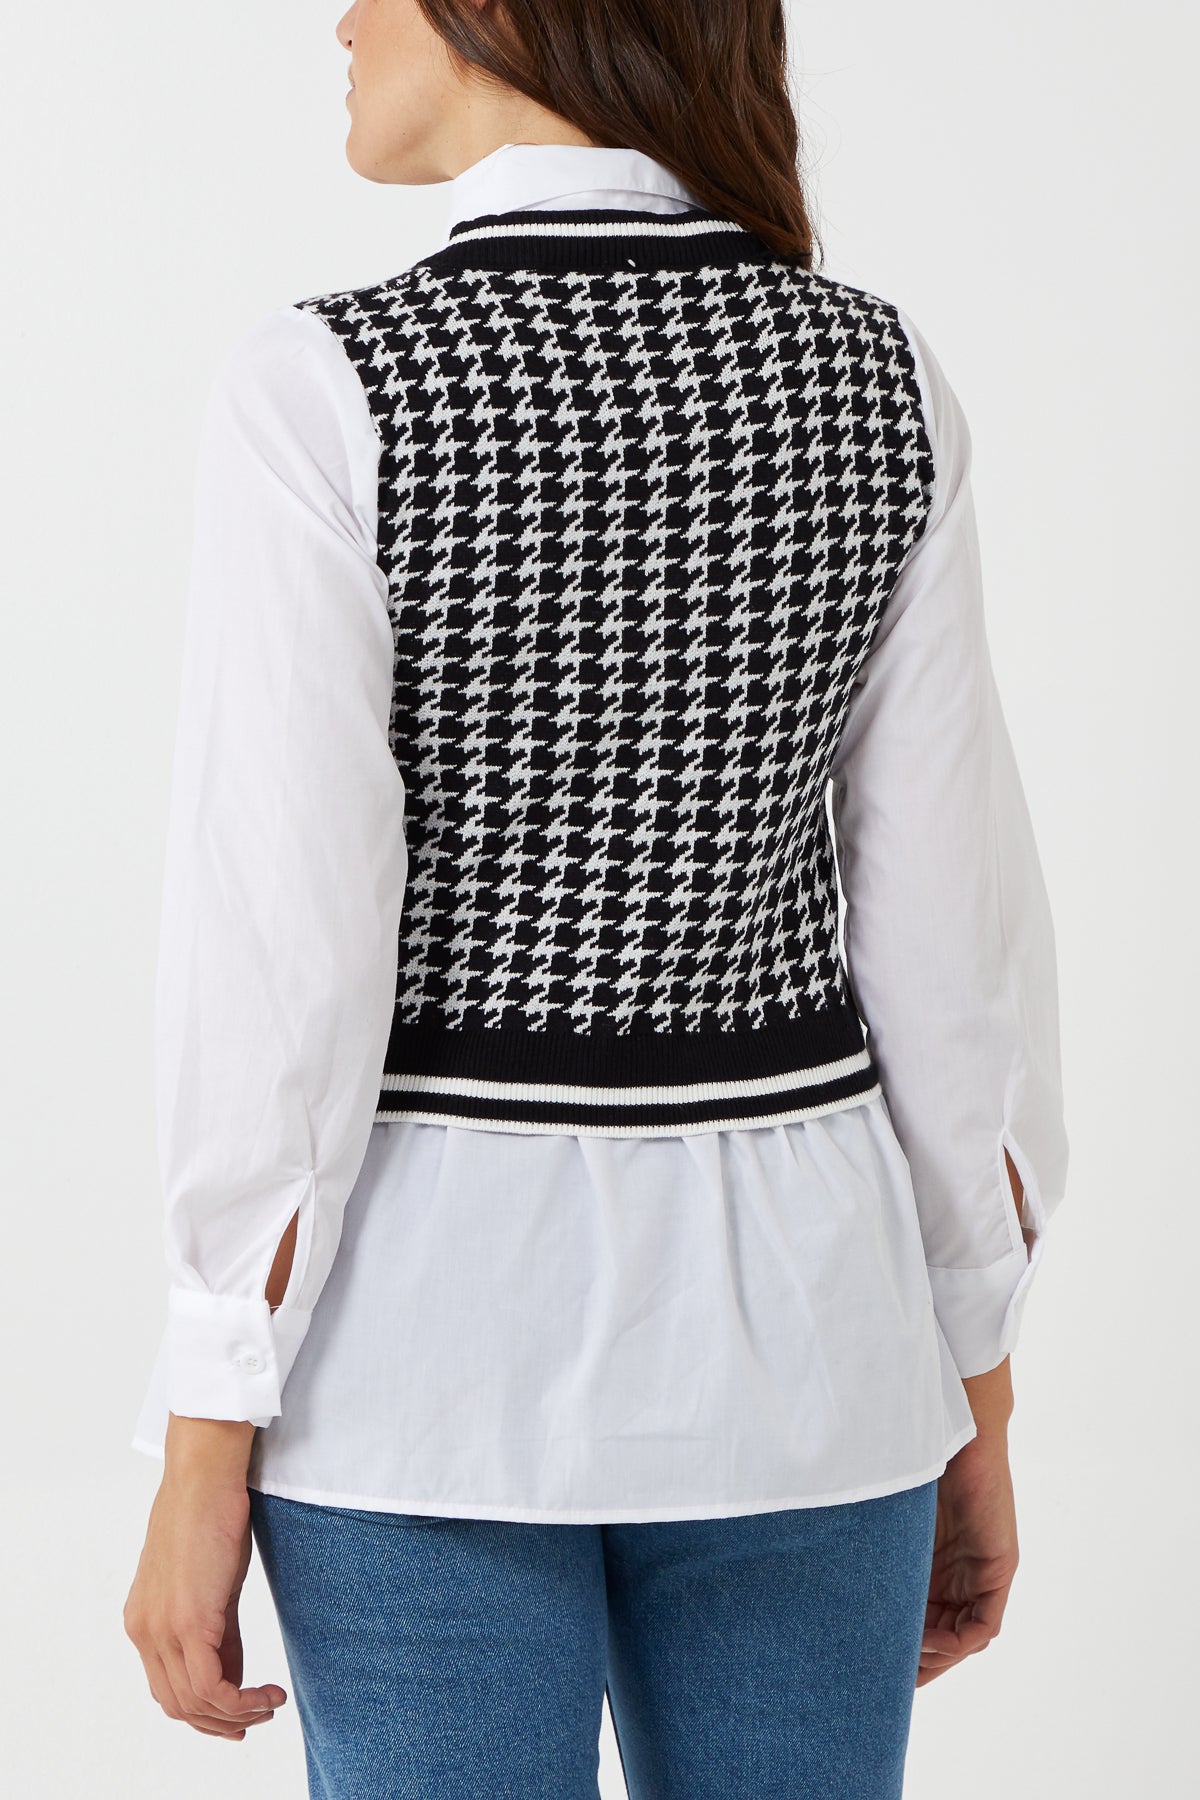 Houndstooth Buttoned Vest With Undershirt